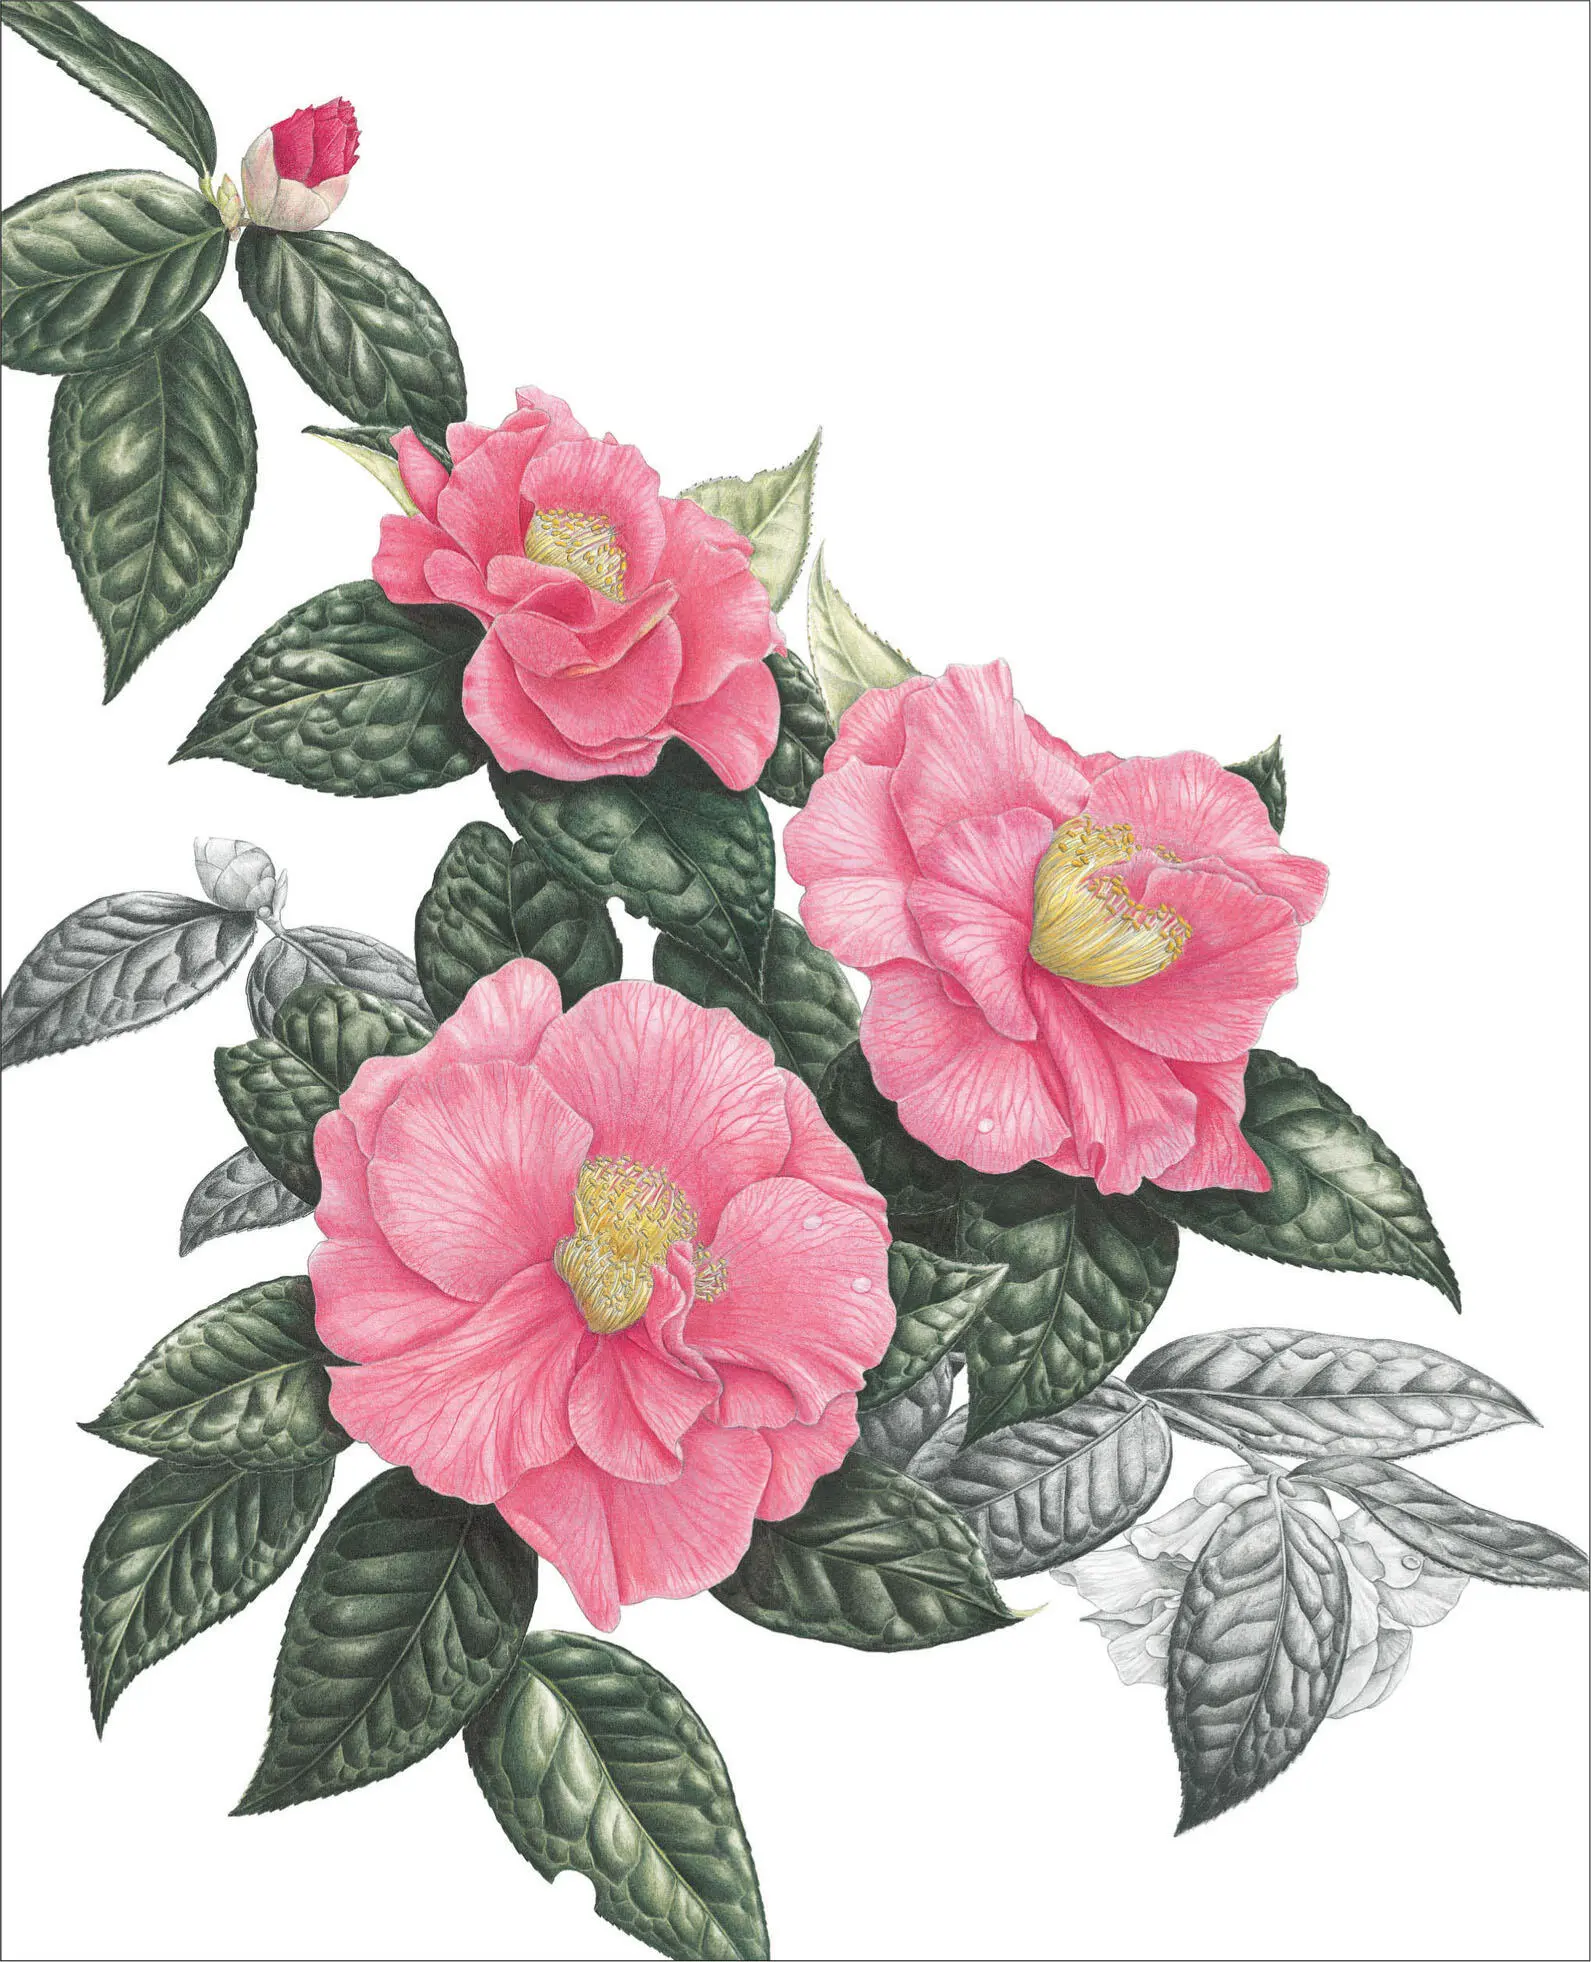 PINK CAMELLIAS 50 x 36 cm 20 x 14 in COPYRIGHT Copyright Foreword - фото 2